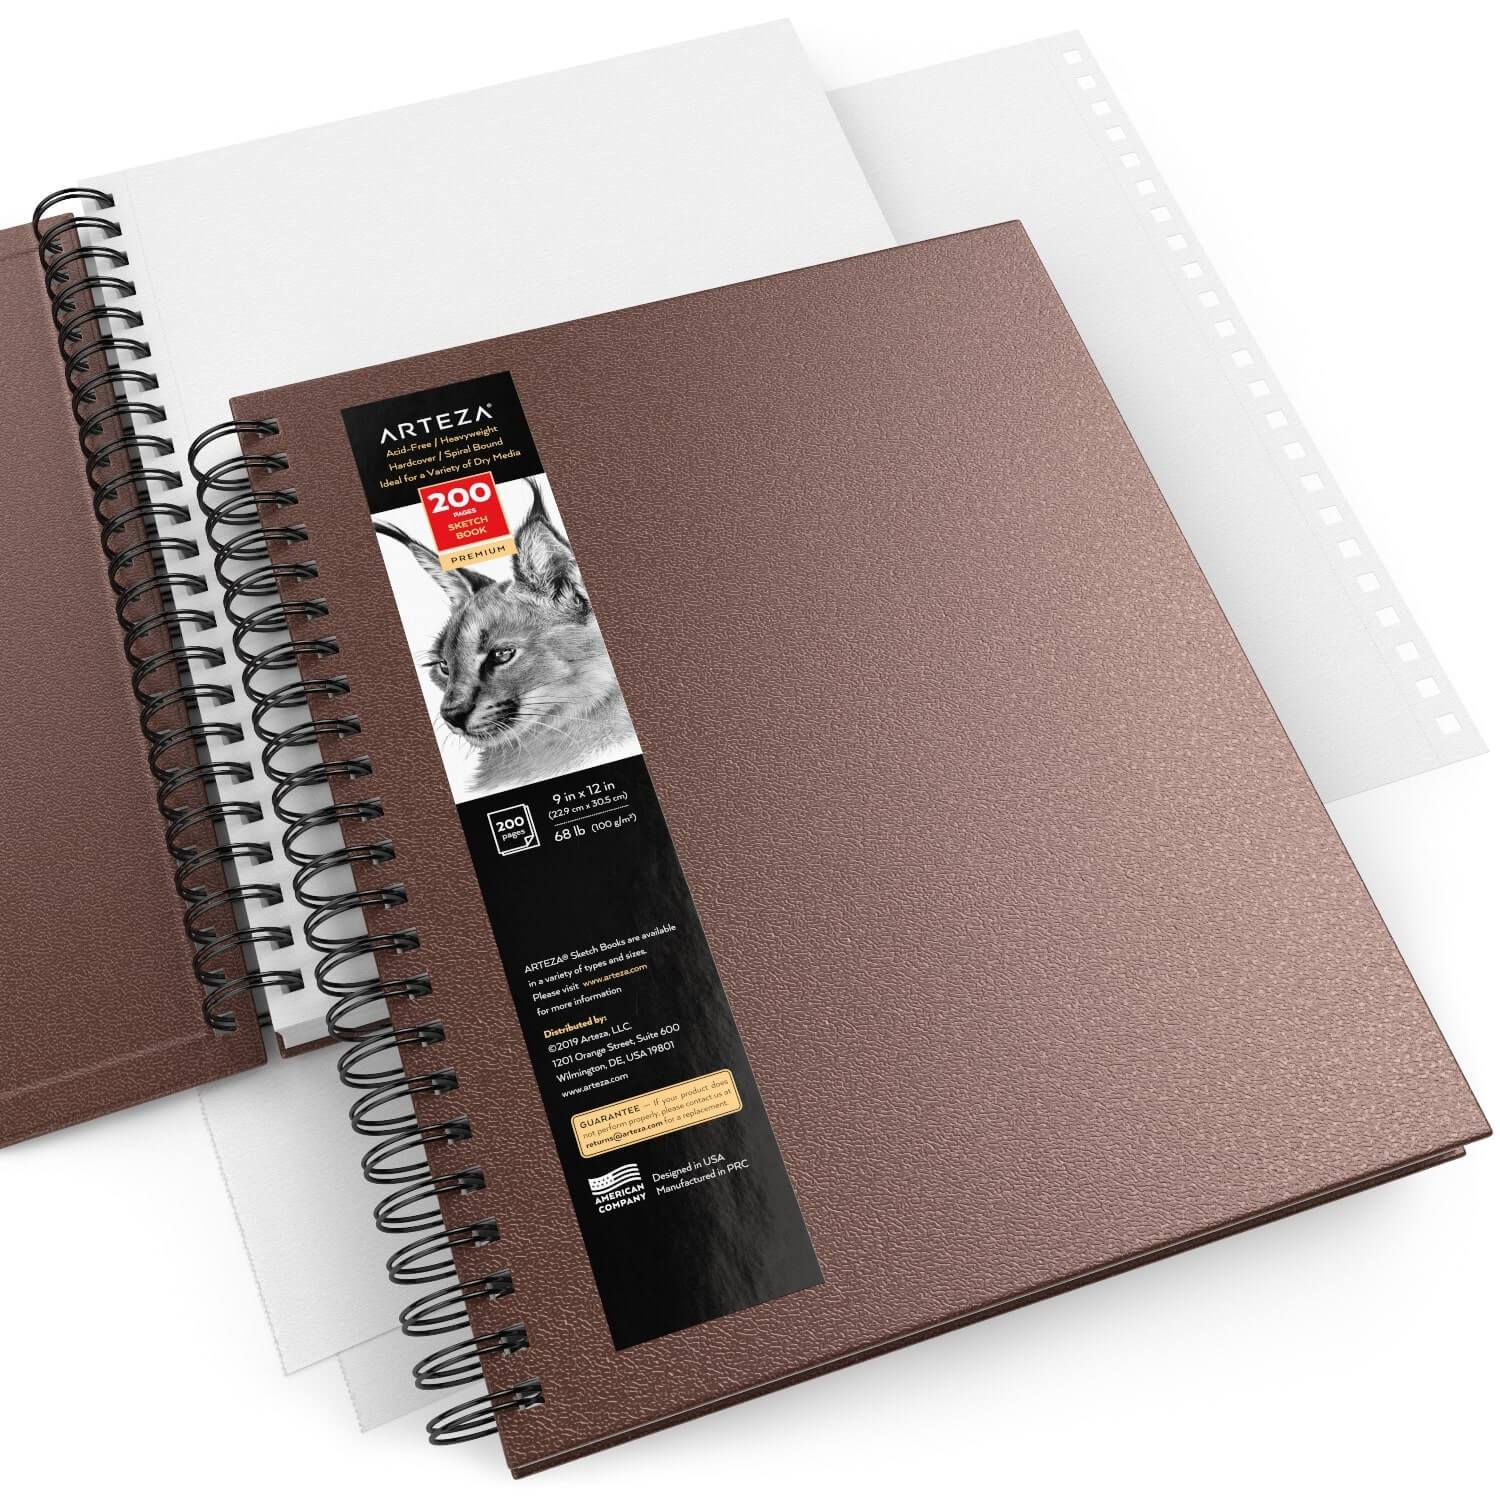 9x12 Sketchbook - Sketch Book Pack of 2, 200 Sheets (68 lb/100gsm), Spiral  Bound Artist Sketch Pad, 100 Sheets Each, Durable Acid Free Drawing Paper,  Ideal for Adults & Teens 9x12 - 2 Pack